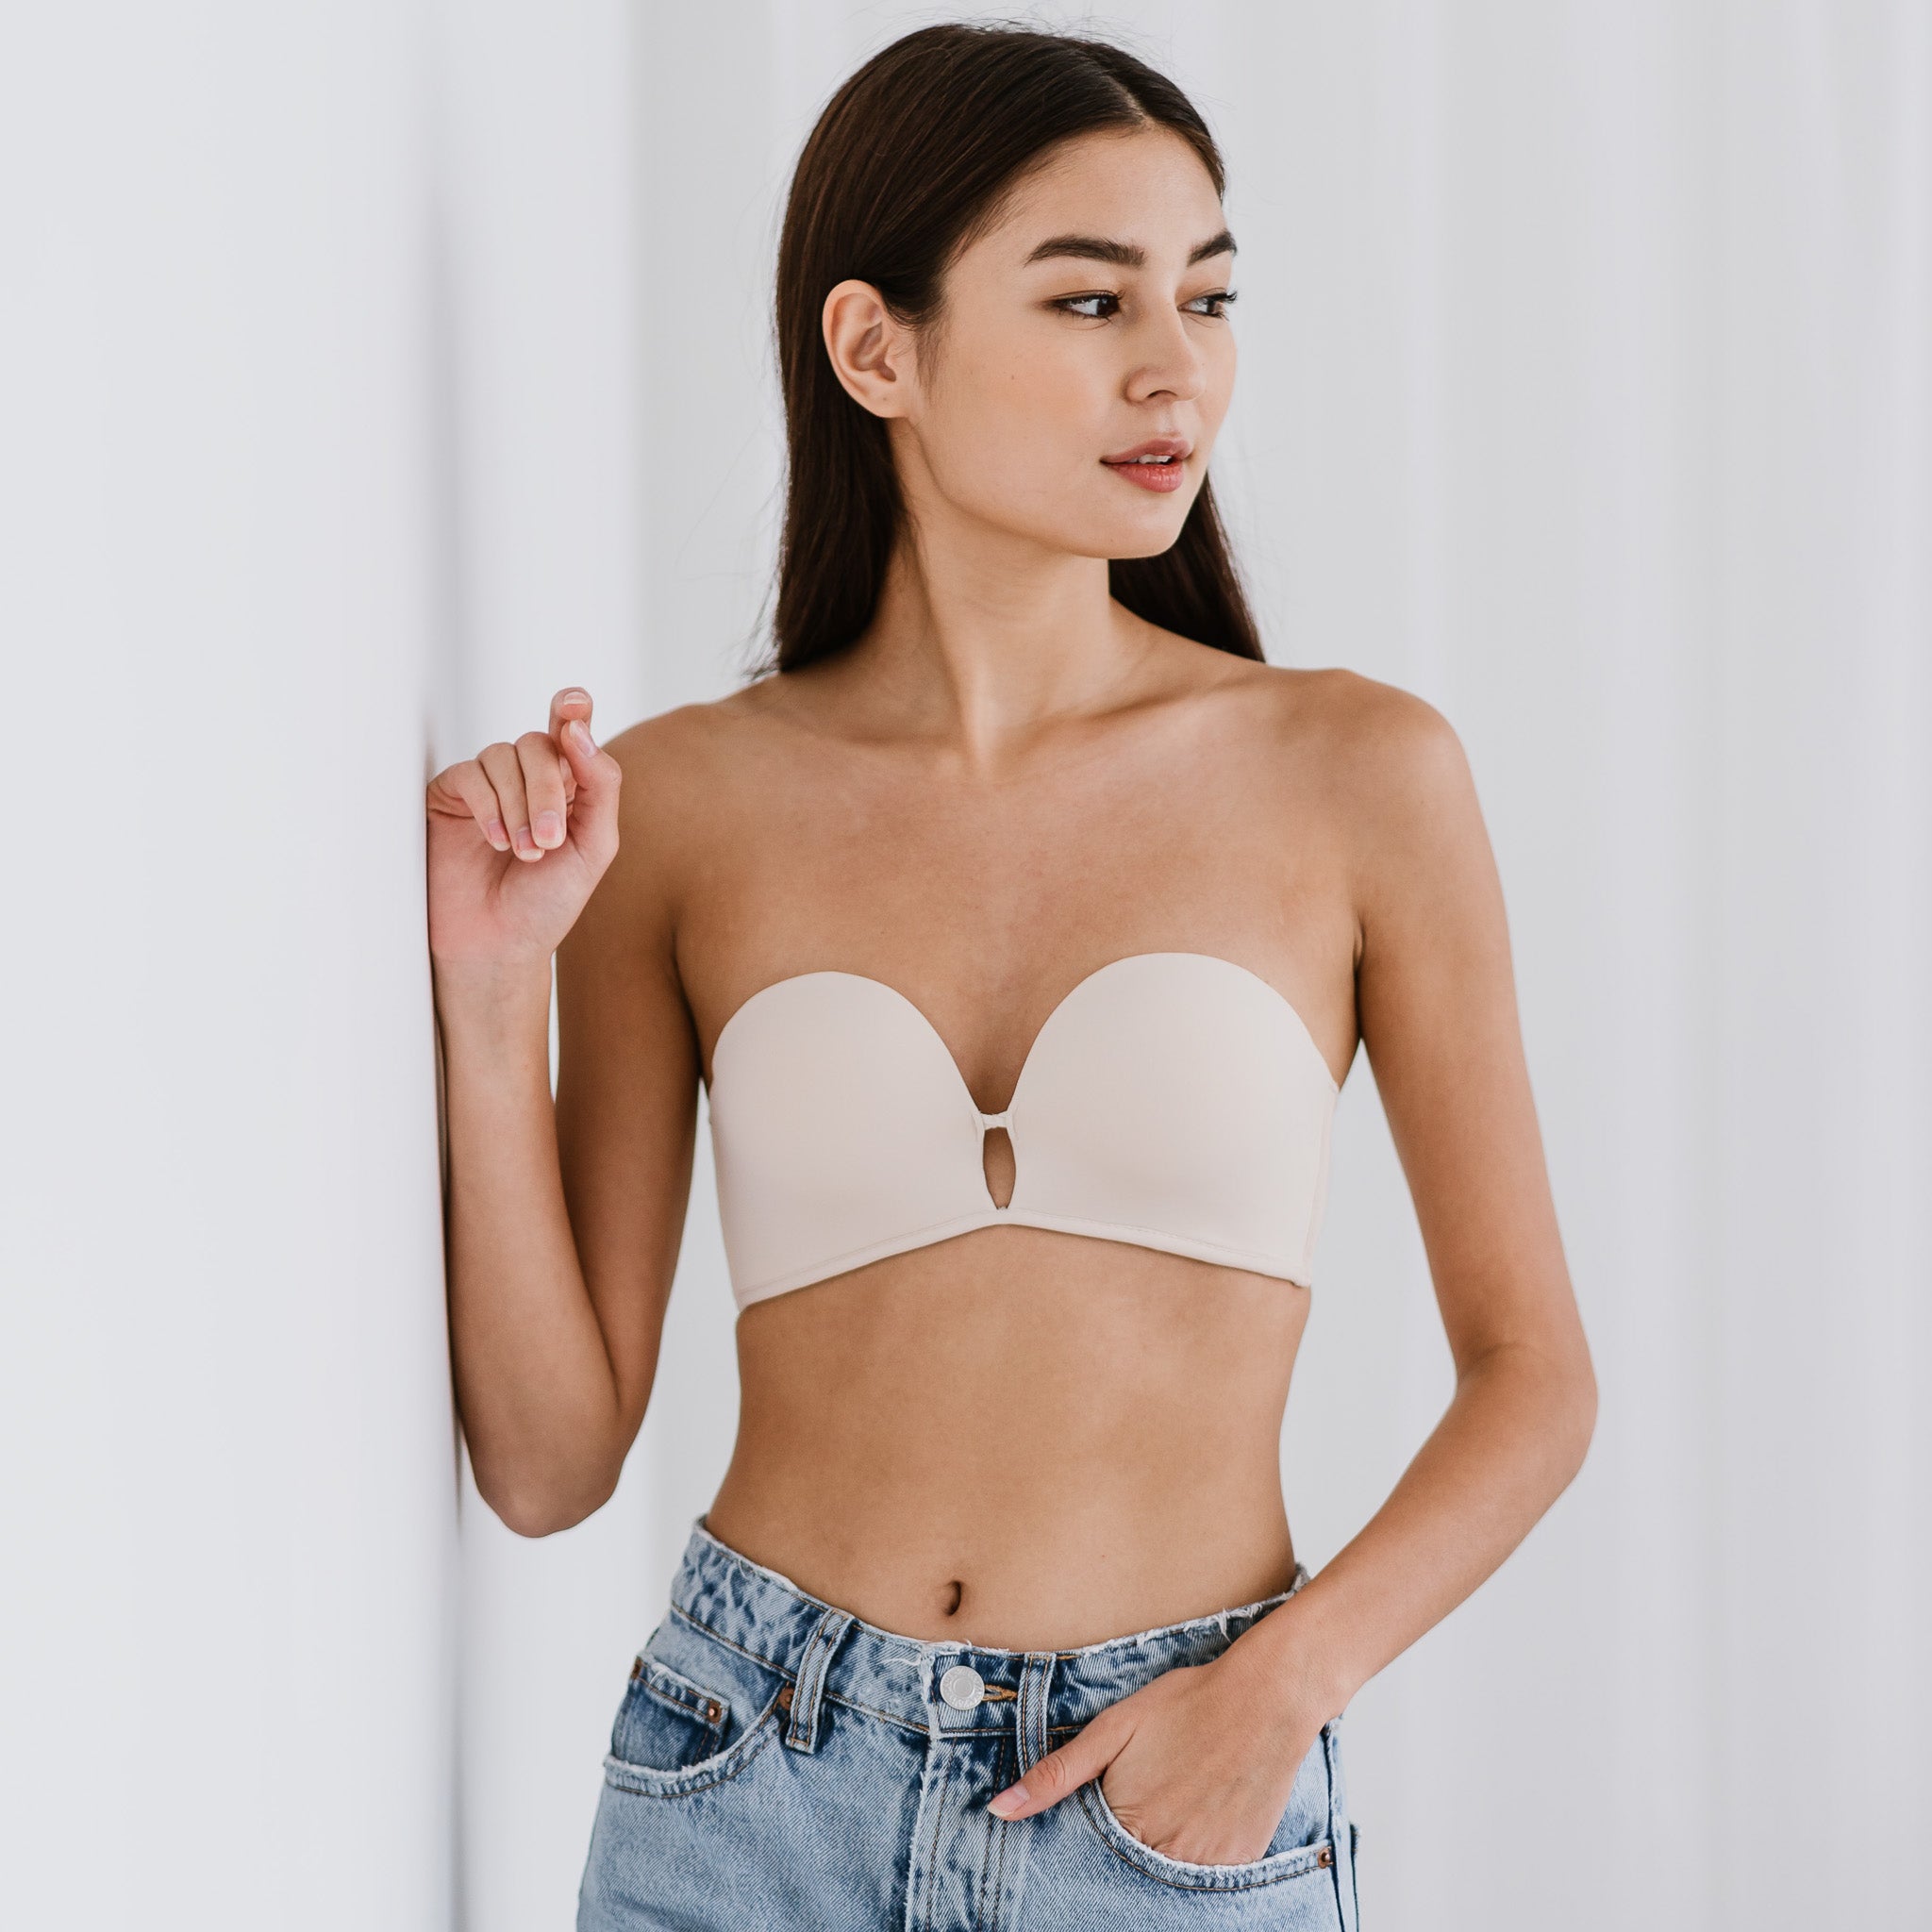 WOWENY Strapless Bras for Women Non-Slip Silicone Padded Bandeau Bra  Seamless Wireless Tube Top Strapless Push Up Bras (Beige,Small) at   Women's Clothing store